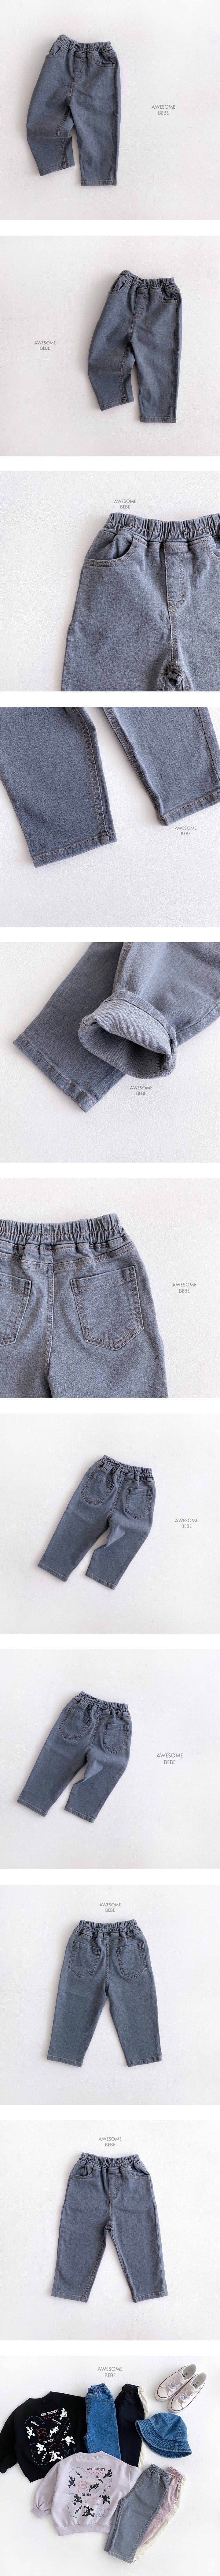 Awesome Bebe - Korean Children Fashion - #magicofchildhood - Real Baggy Jeans